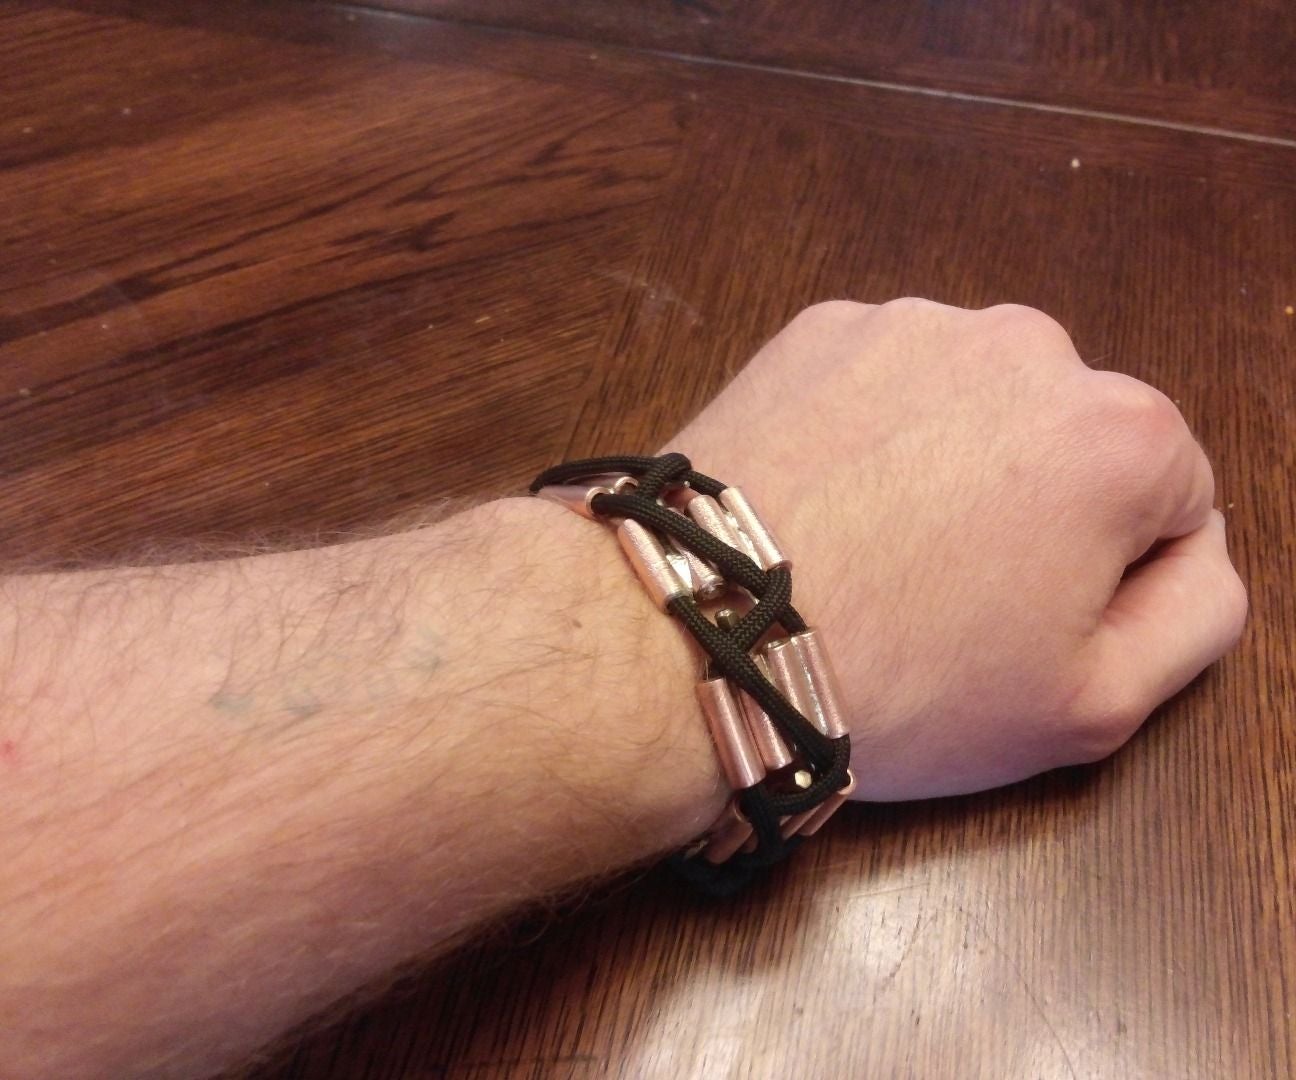 Wrist Multi-Tool of Copper and Paracord